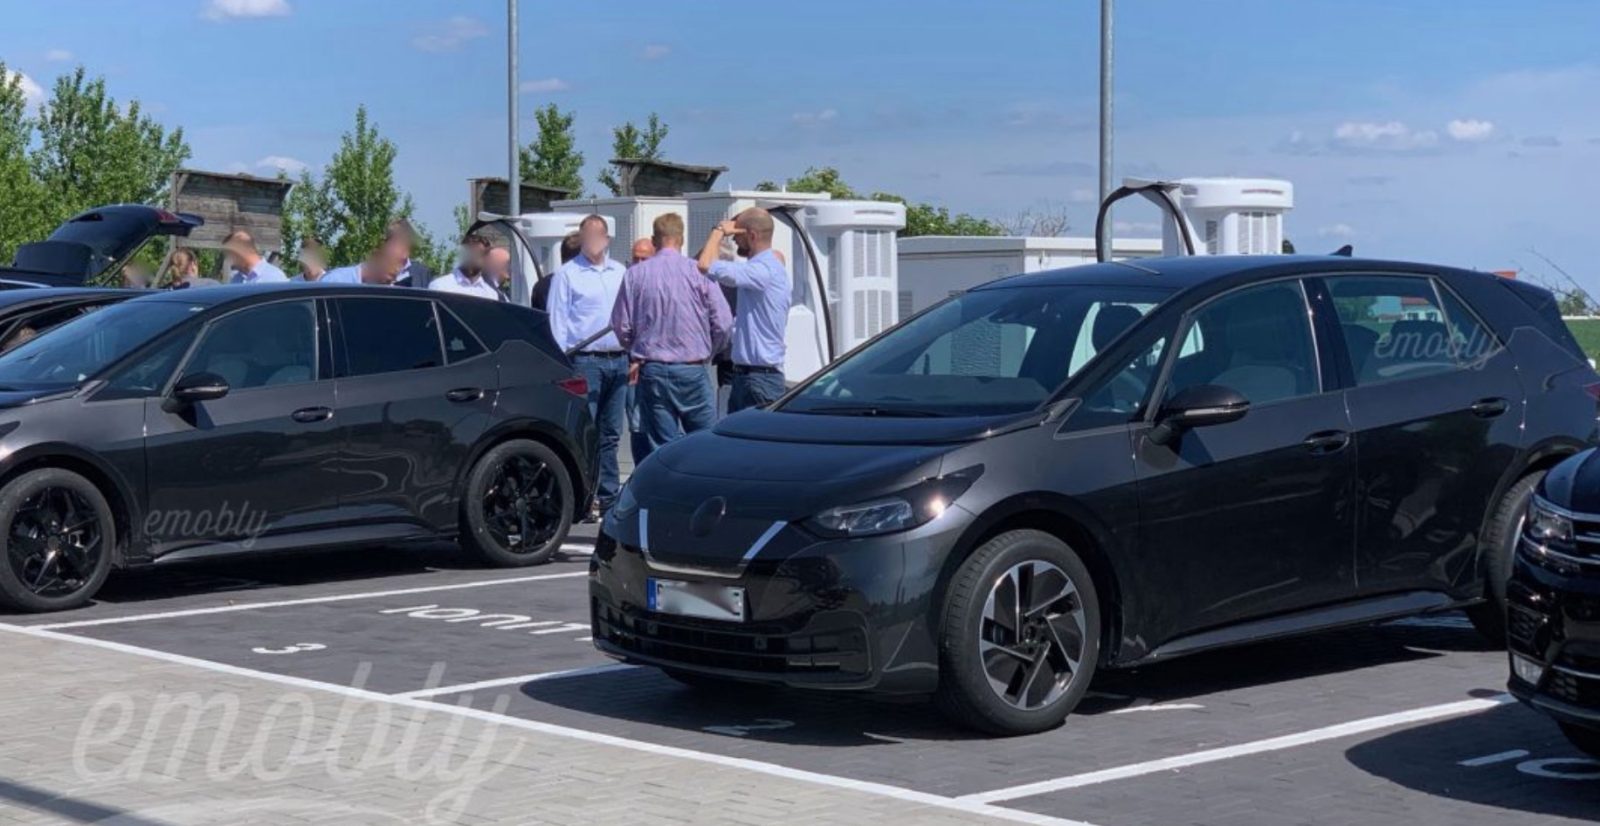 New VW ID3 electric hatchback prototypes spotted in the wild - Electrek